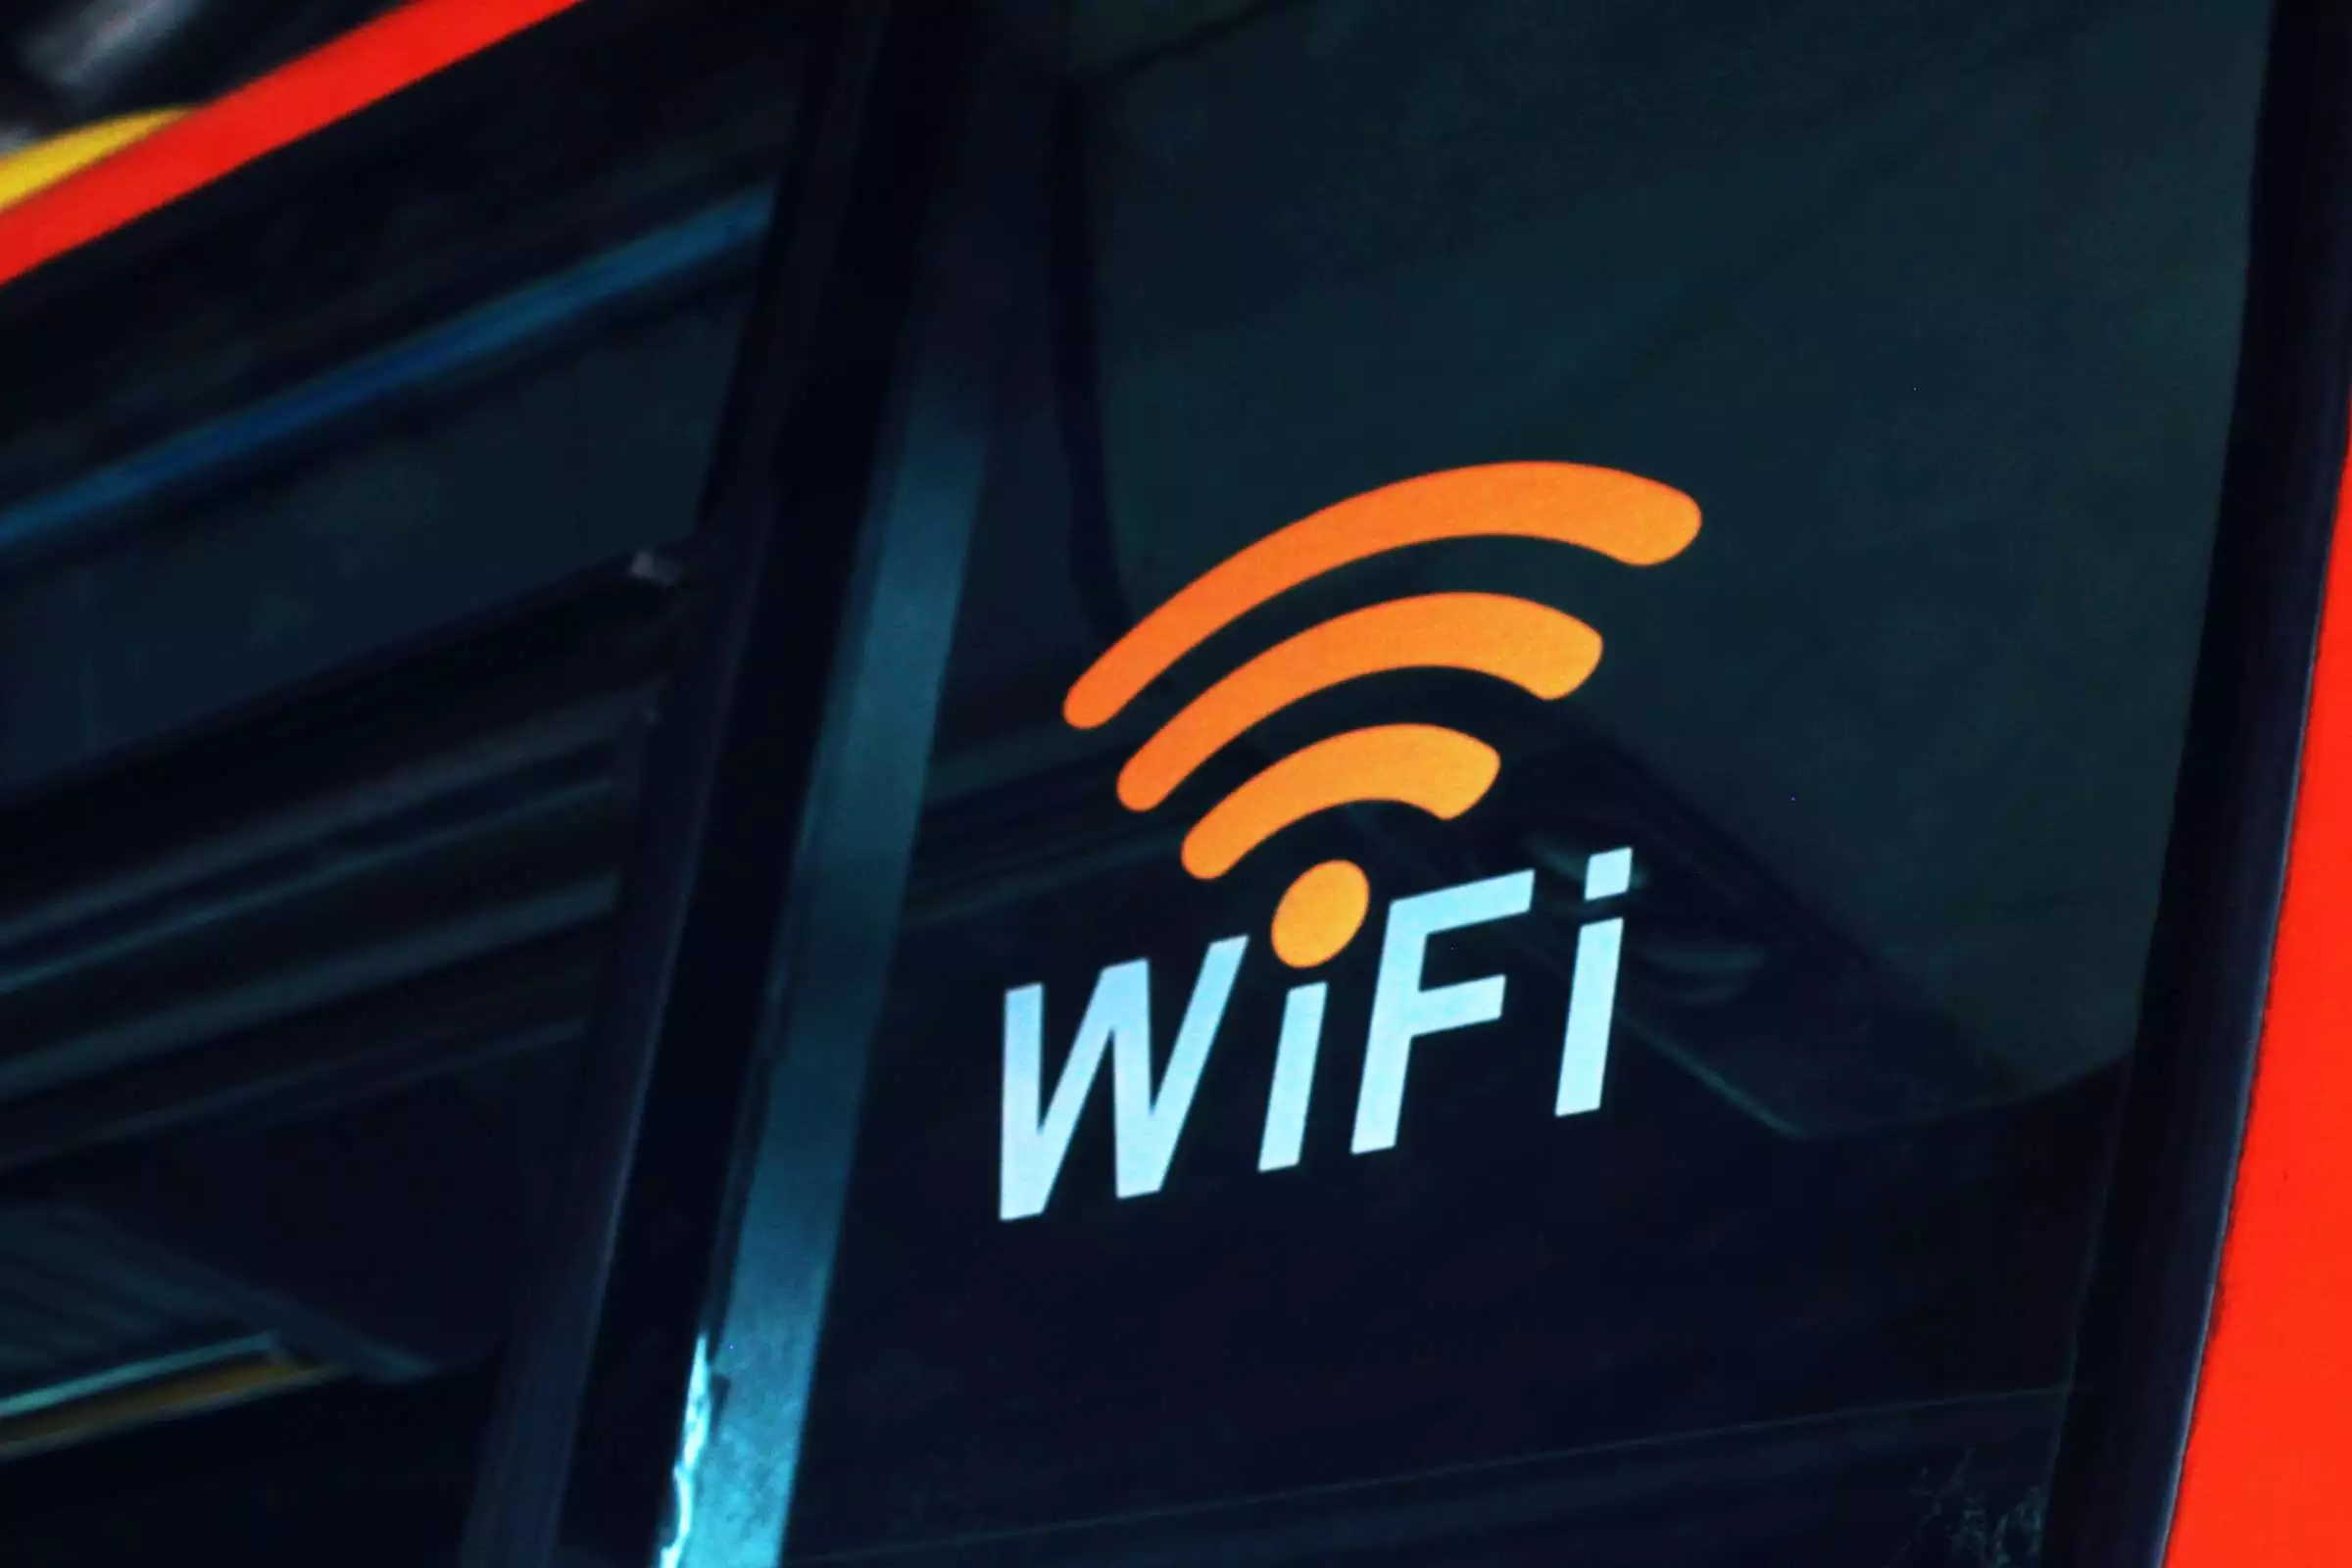 How To Connect To Wi-fi Without Password